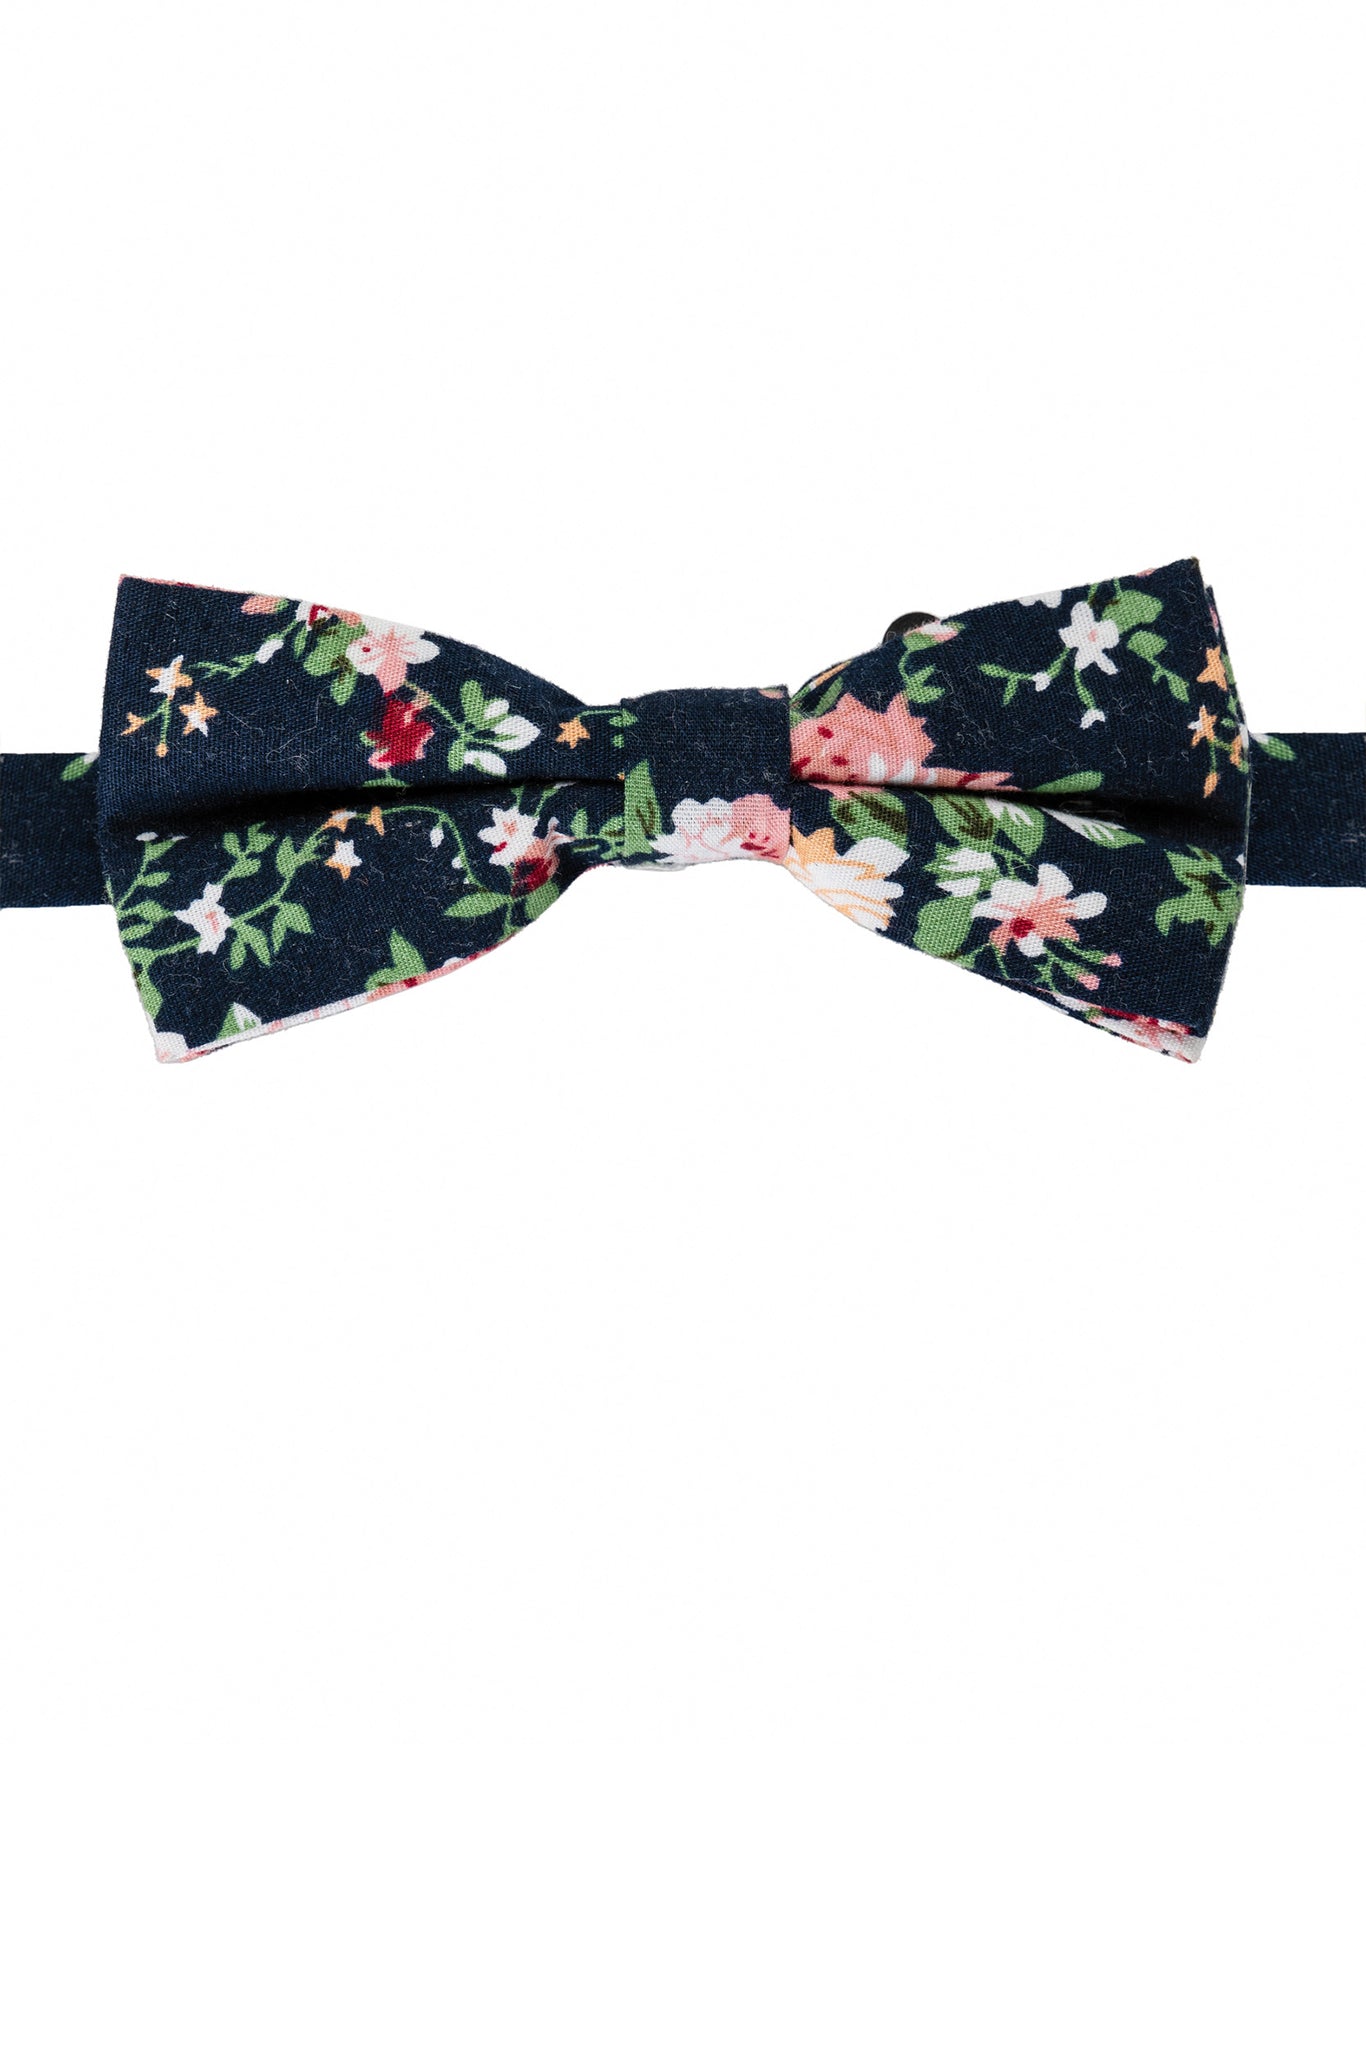 BOW TIE - Floral Pattern